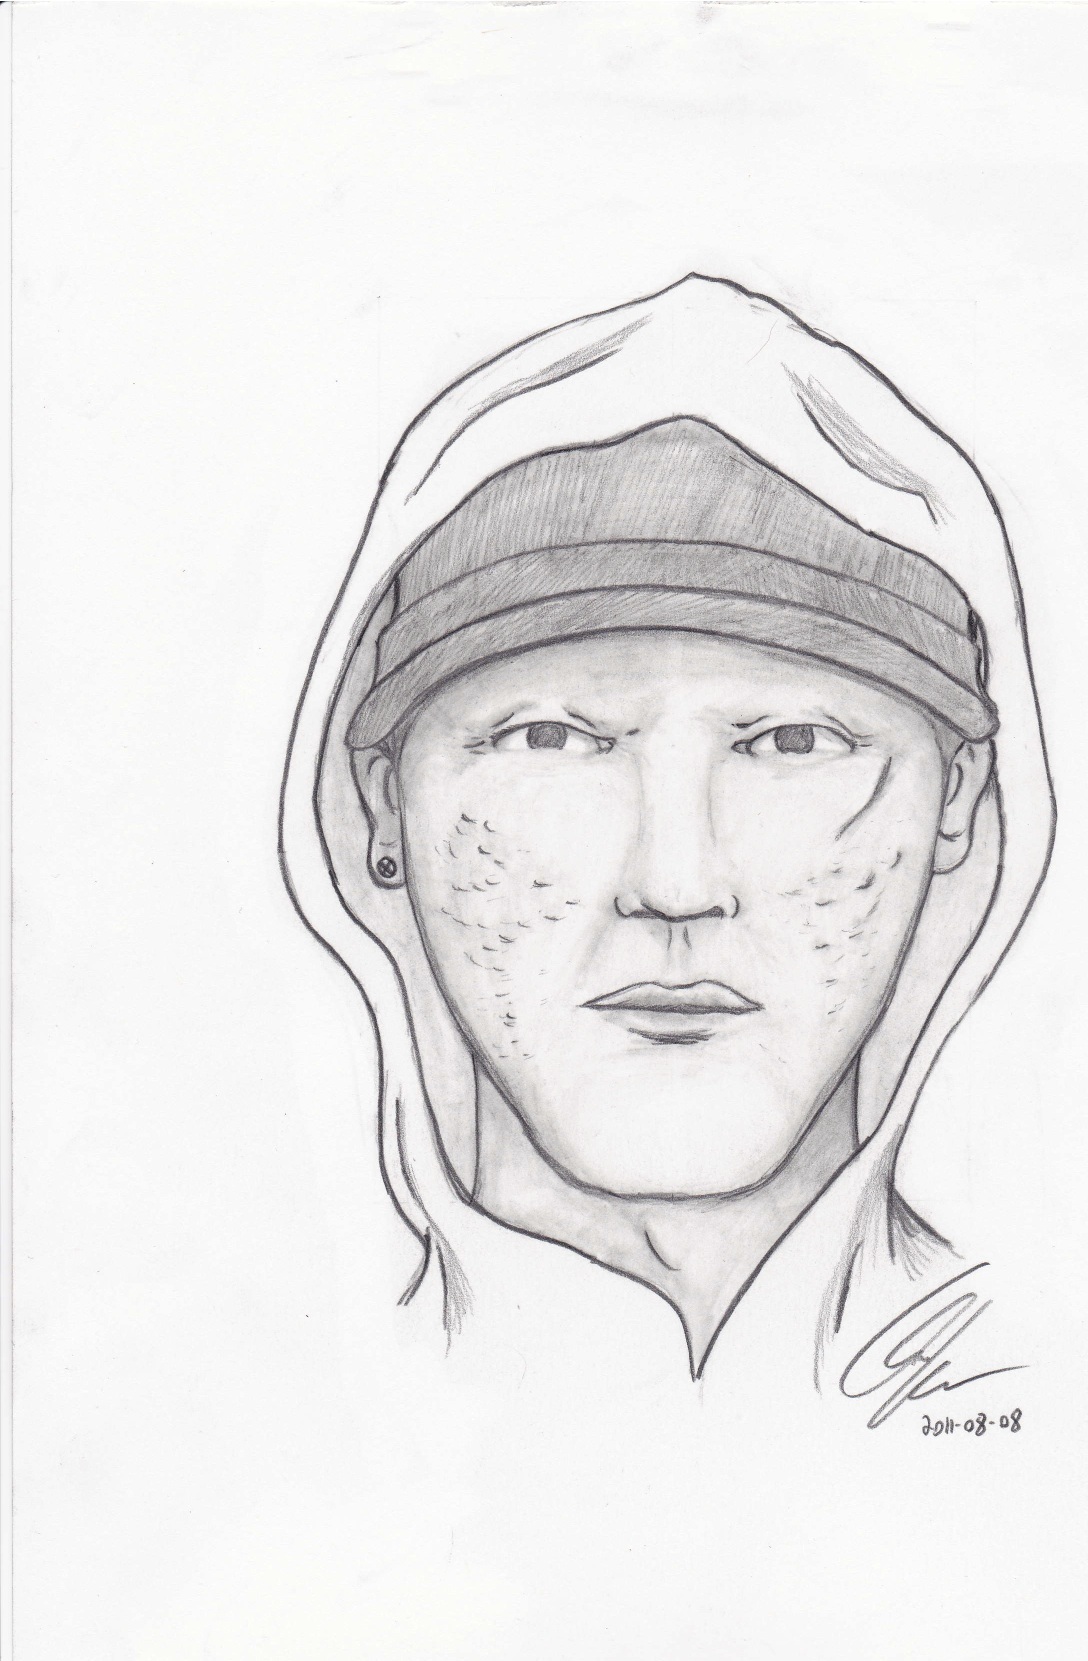 INVESTIGATION CONTINUES - RCMP have released the sketch of a person of interest in connection to the murder of 22-year-old Oscar Salazar. Salazar was shot and killed Aug. 2 while sitting in a vehicle in the back alley of 63 St. behind the Cornerstone Gospel Chapel. RCMP are looking for a black male with a medium build who is 5' 10" to 5' 11" tall and is about 20-30 years old. The man was wearing a baseball hat